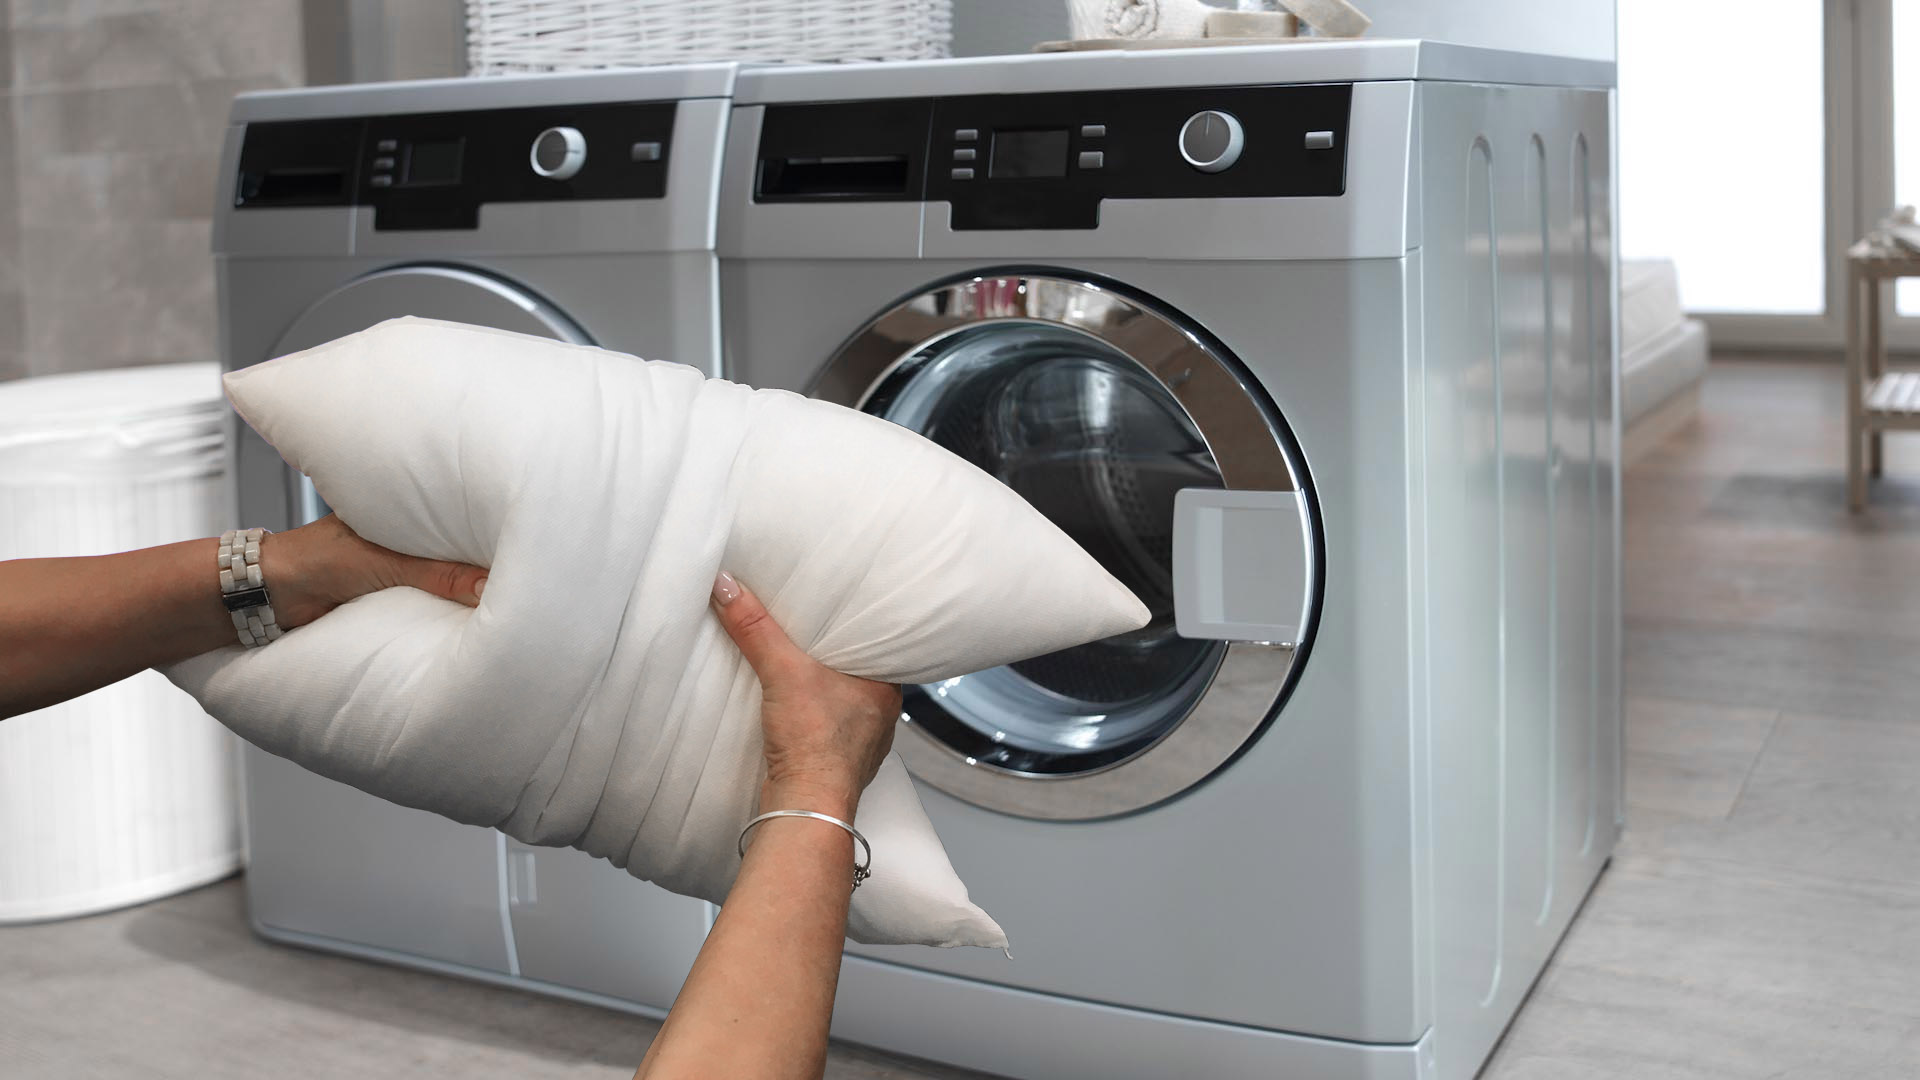 a pillow being placed inside of a washing machine